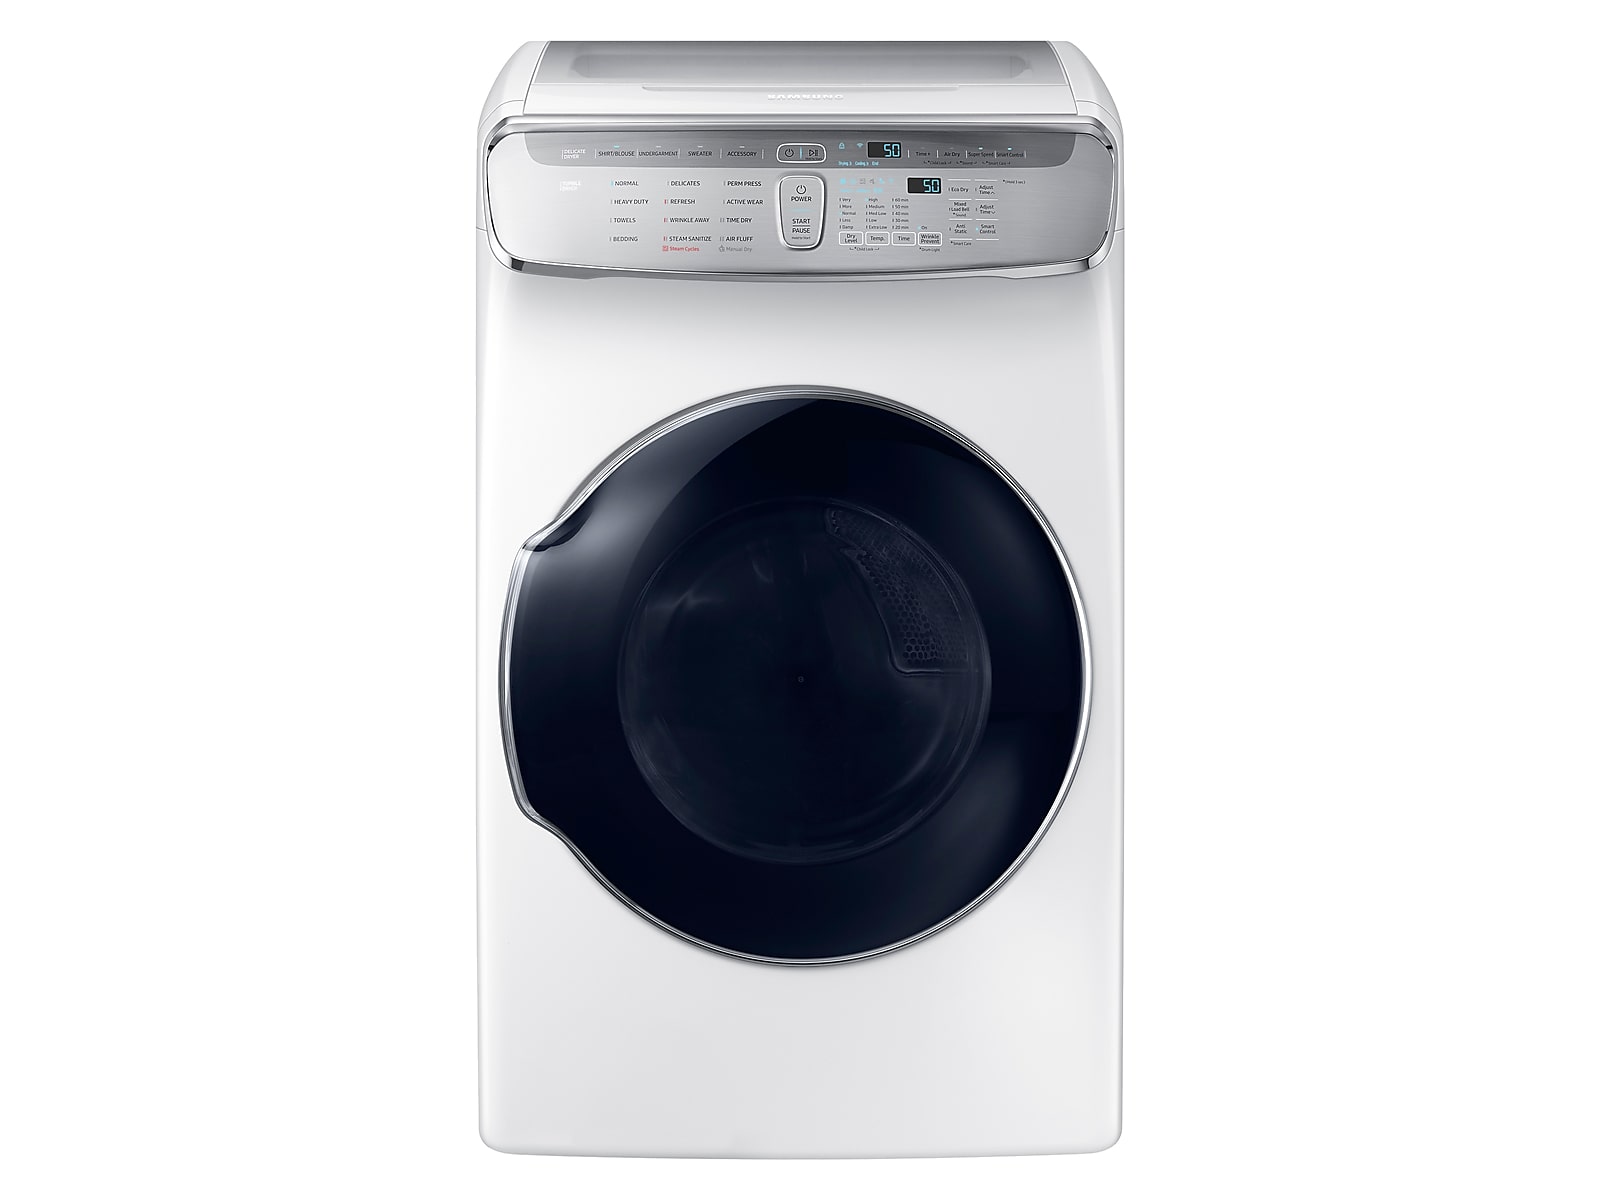 Samsung 7.5 cu. ft. Smart Electric Dryer with FlexDry™ in White(DVE60M9900W/A3) photo